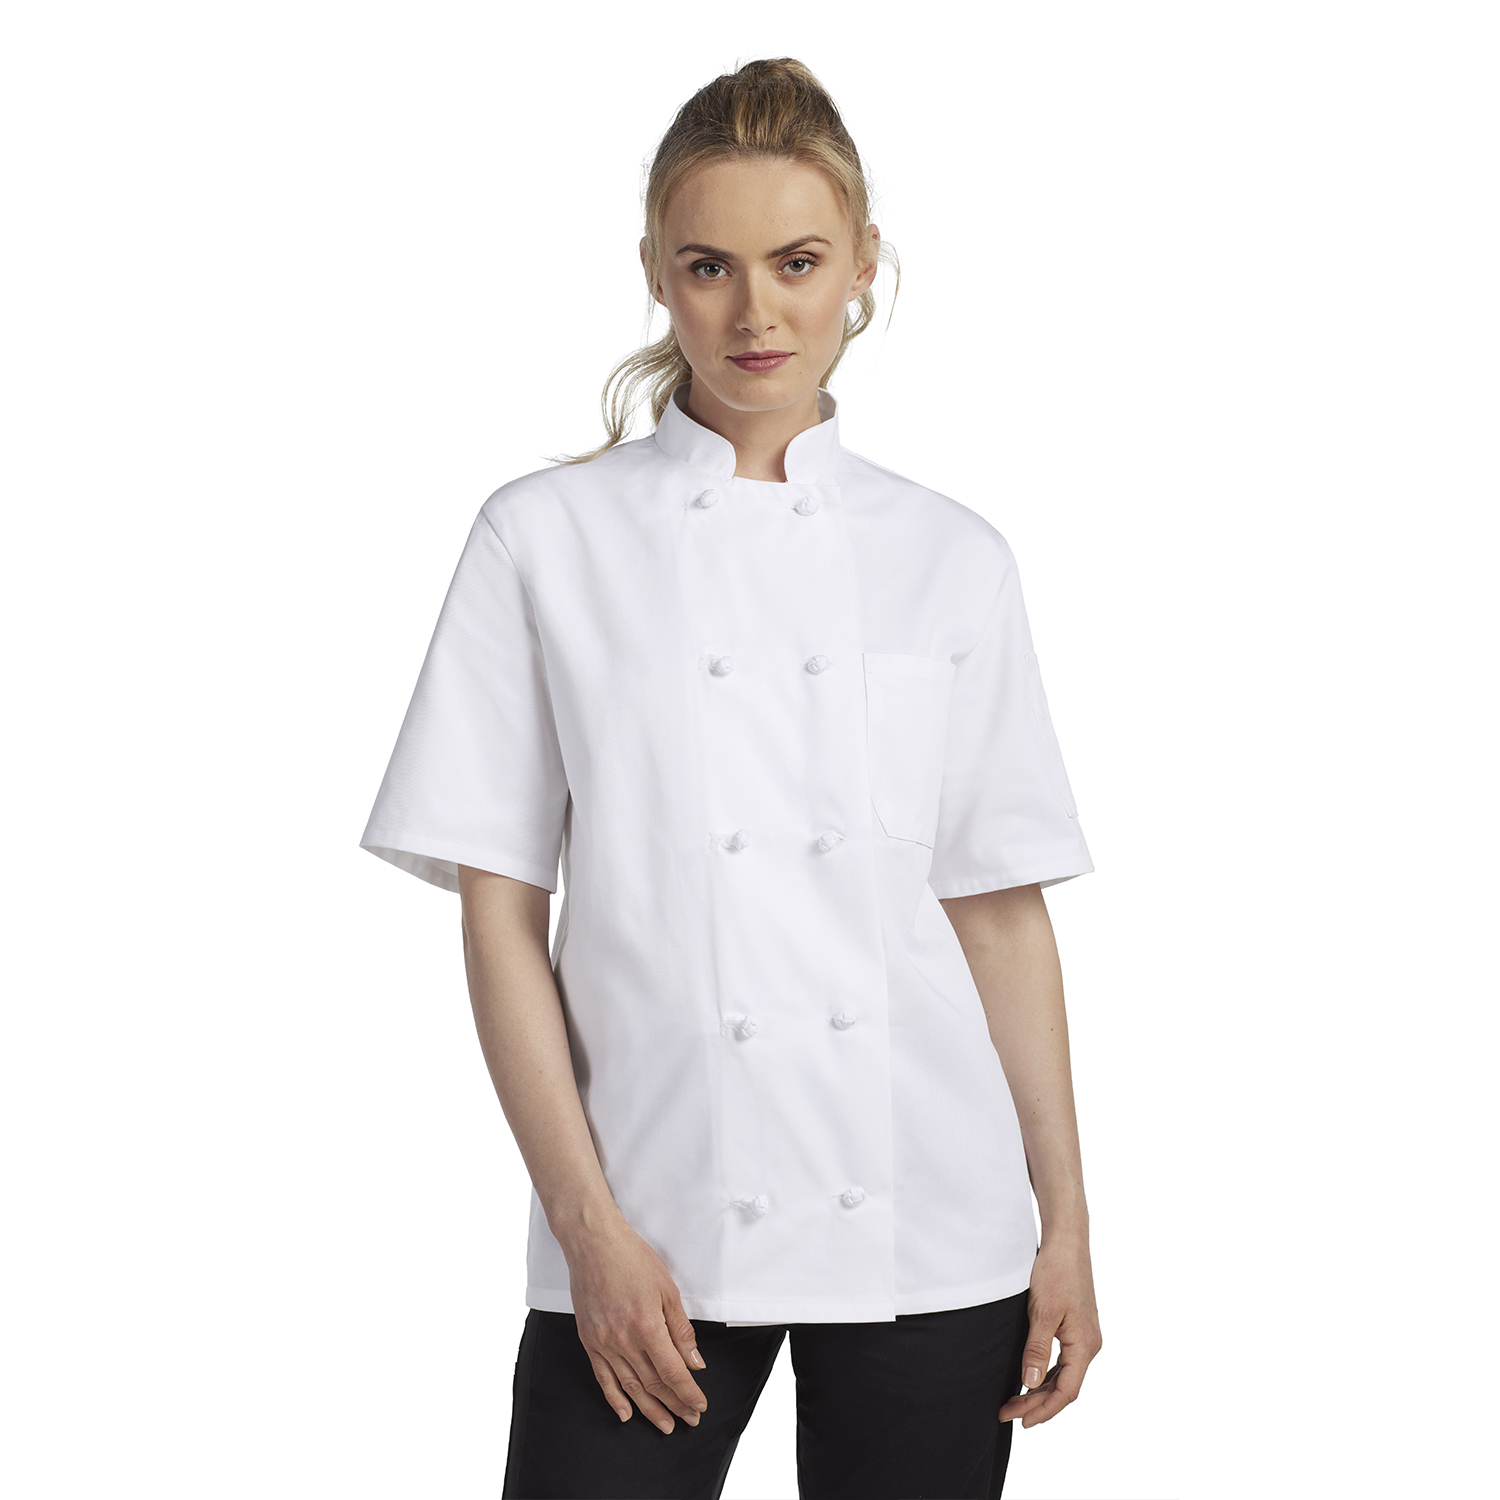 Unisex Short Sleeve Essential Cloth Knot Chef Coats (CW4450)